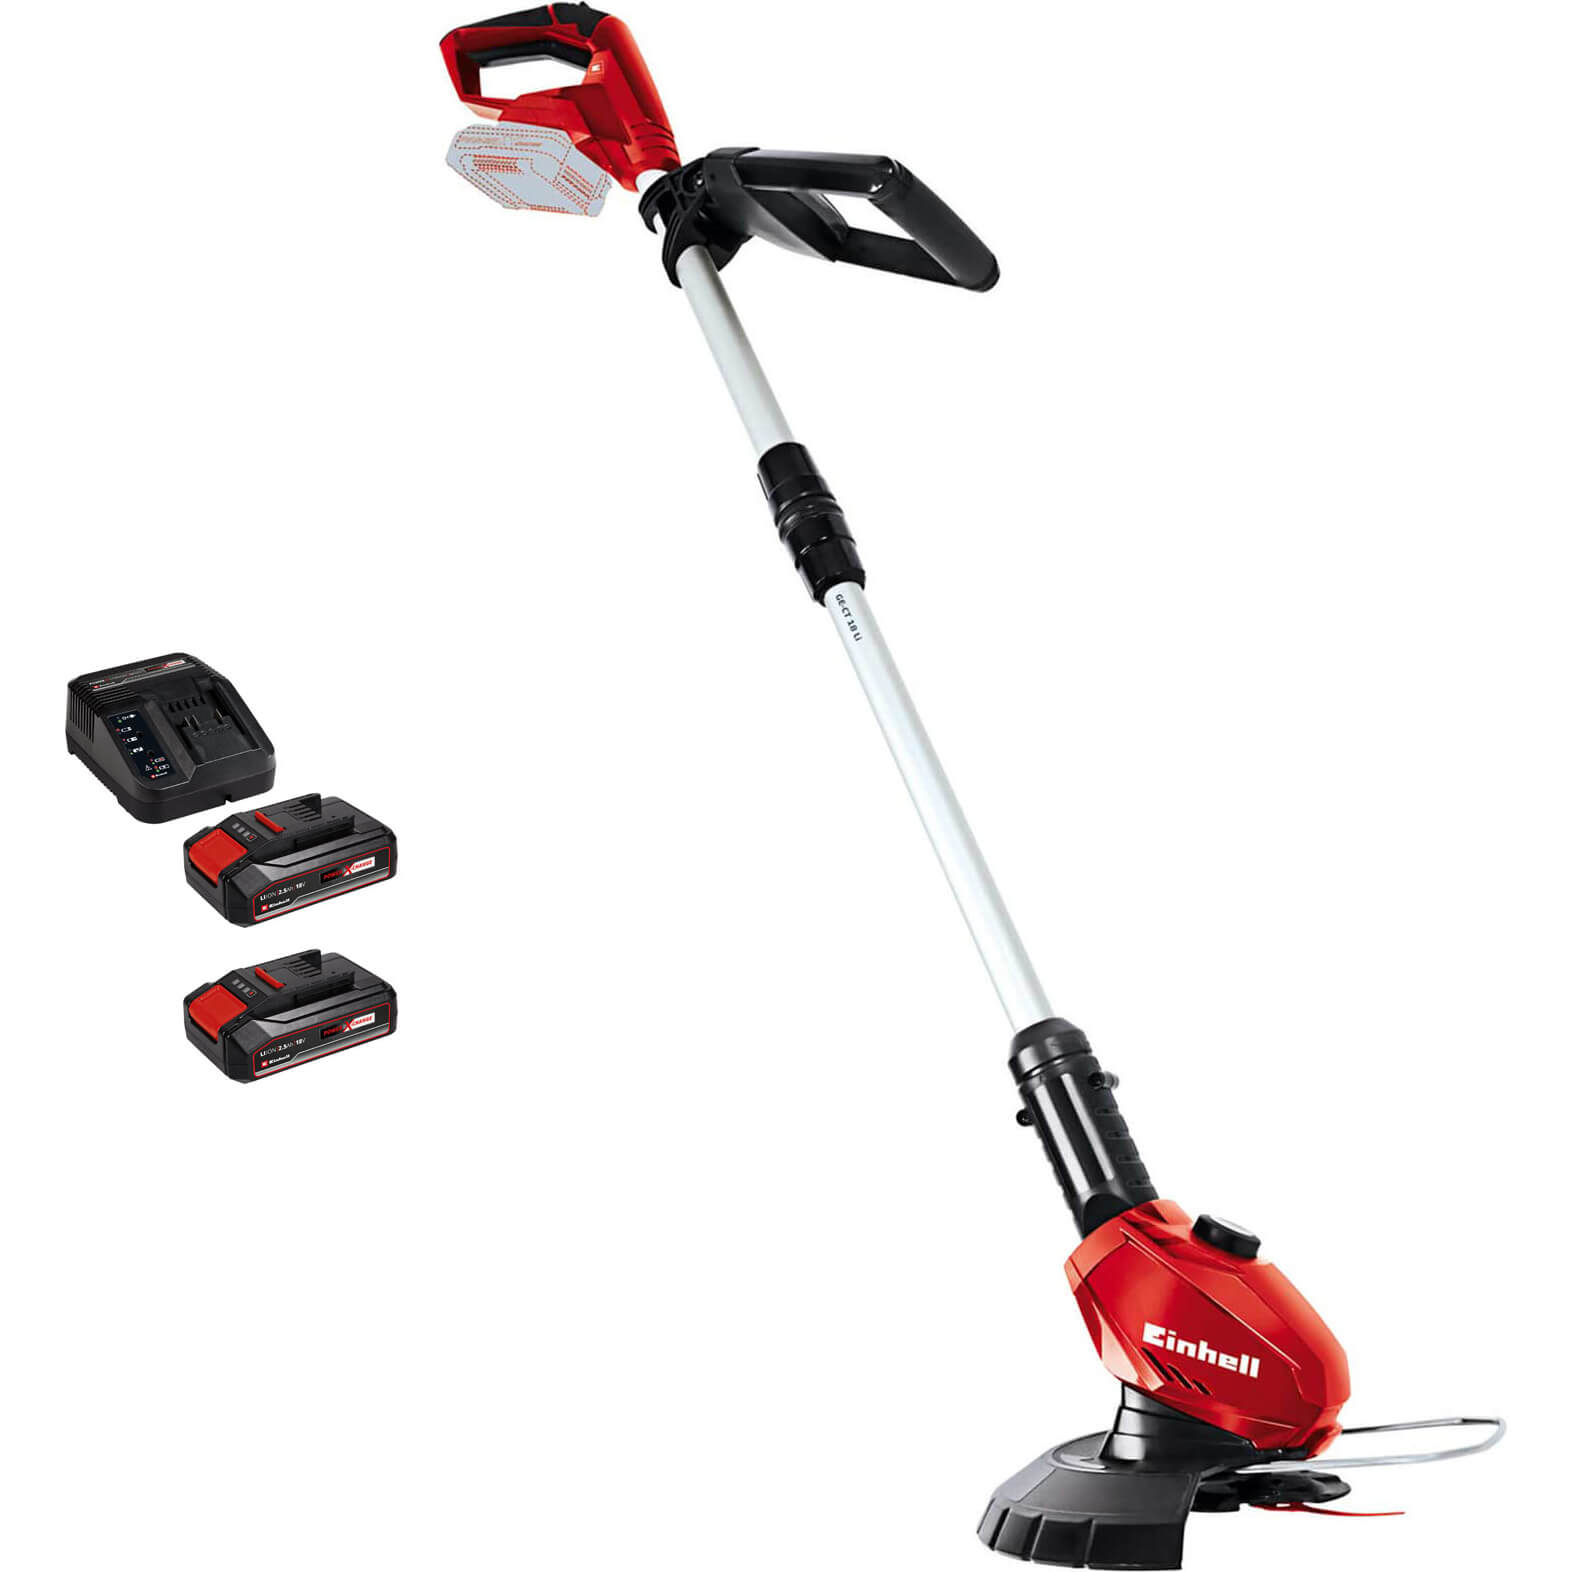 Image of Einhell GE-CT 18 Li 18v Cordless Telescopic Grass Trimmer and Edger 240mm 2 x 2.5ah Li-ion Charger